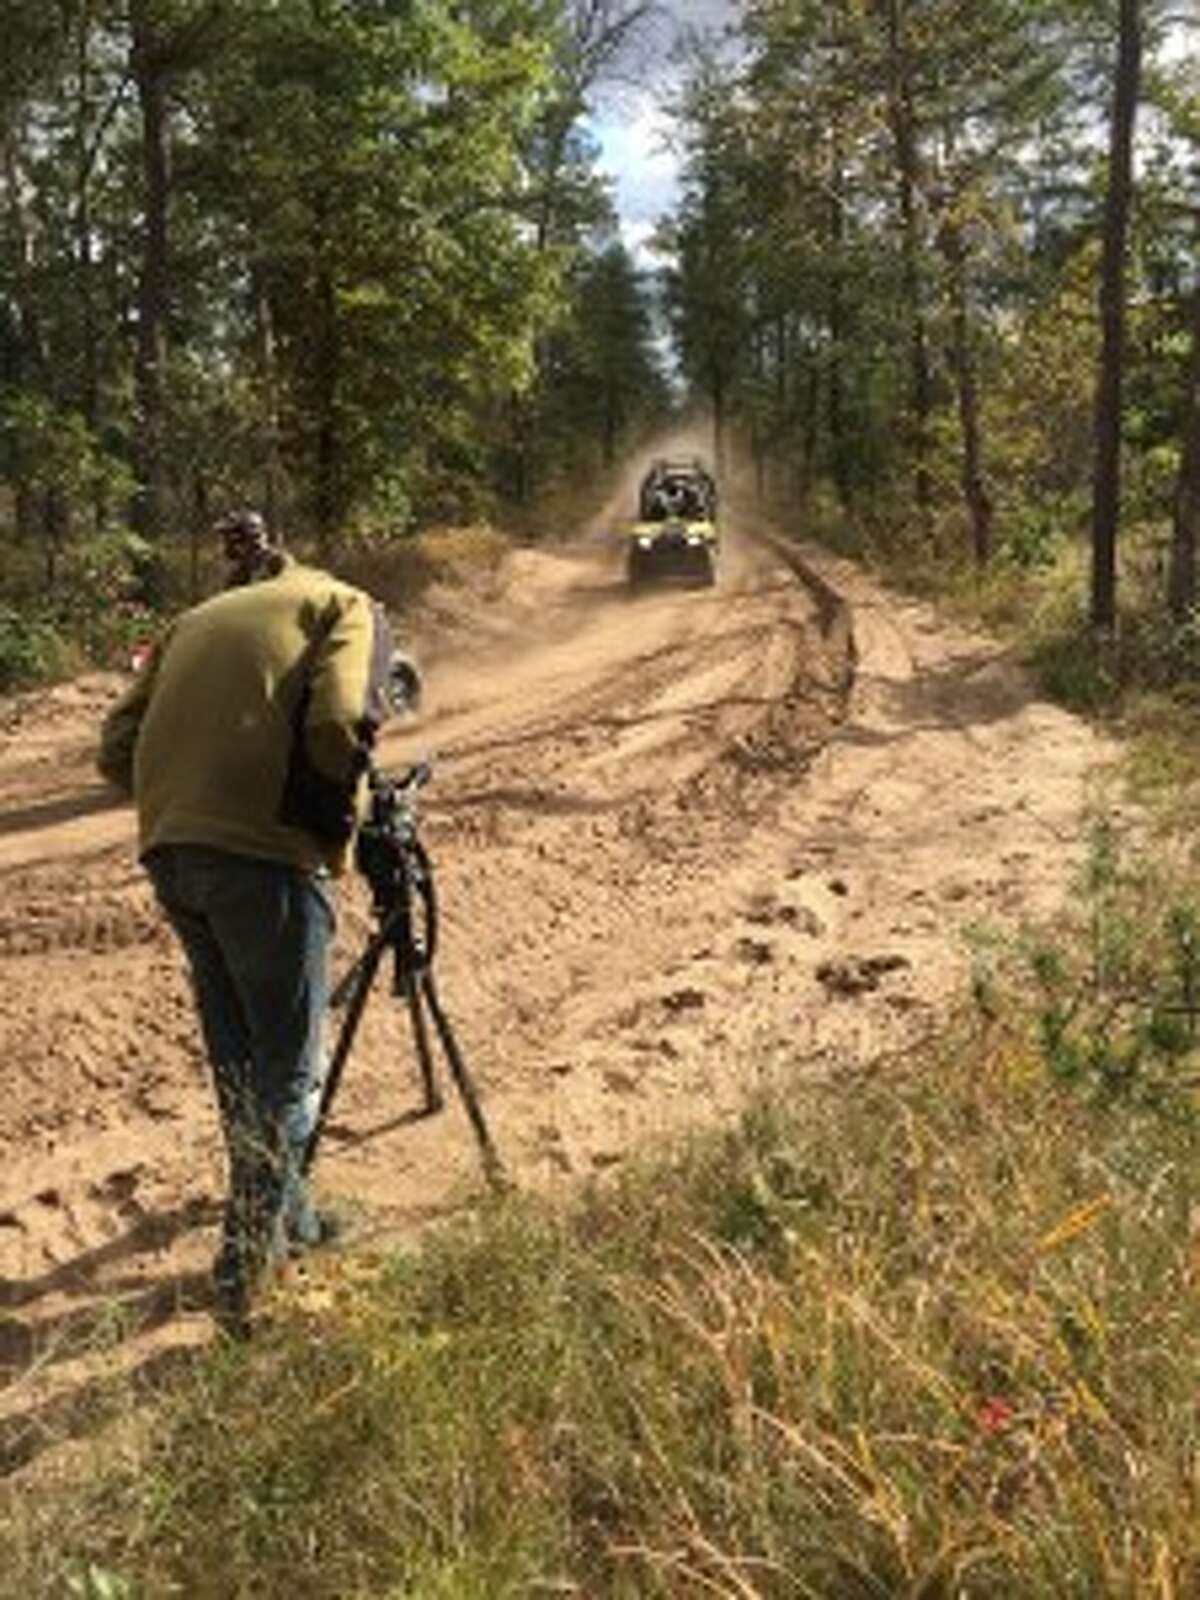 ACTION: ORV dealership Peacock LTD. lent several vehicles to the film crew so they could explore the trails of Lake County at high speed.